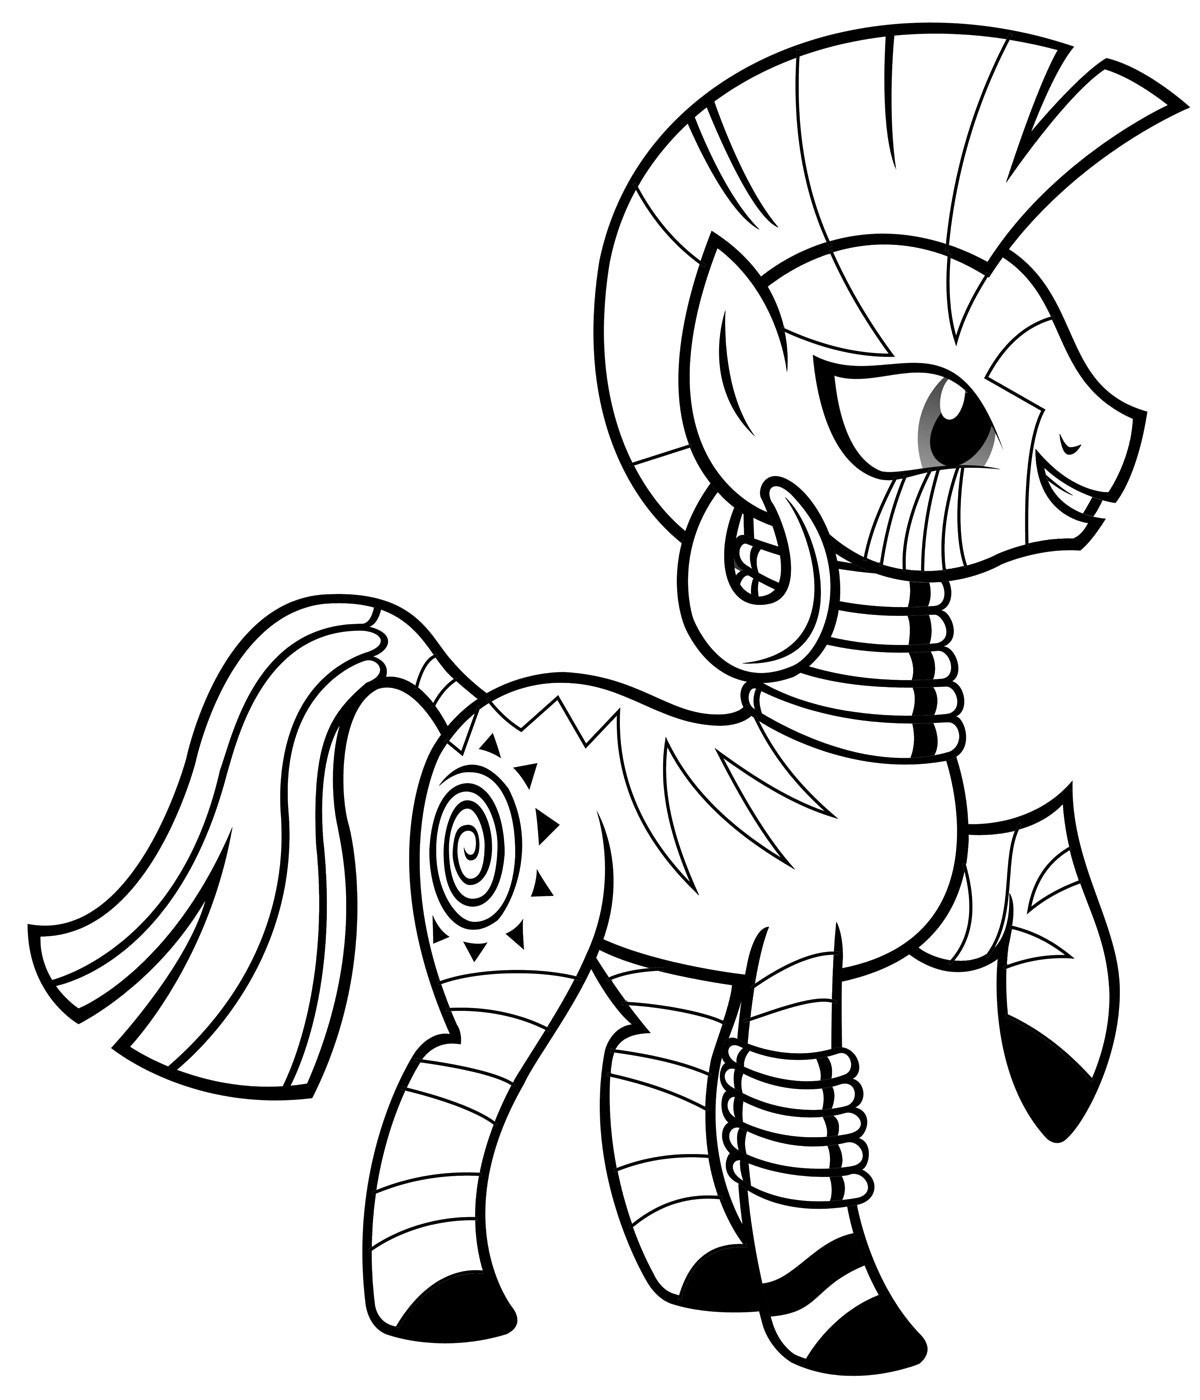 Coloring Pages Of My Little Pony
 Free Printable My Little Pony Coloring Pages For Kids